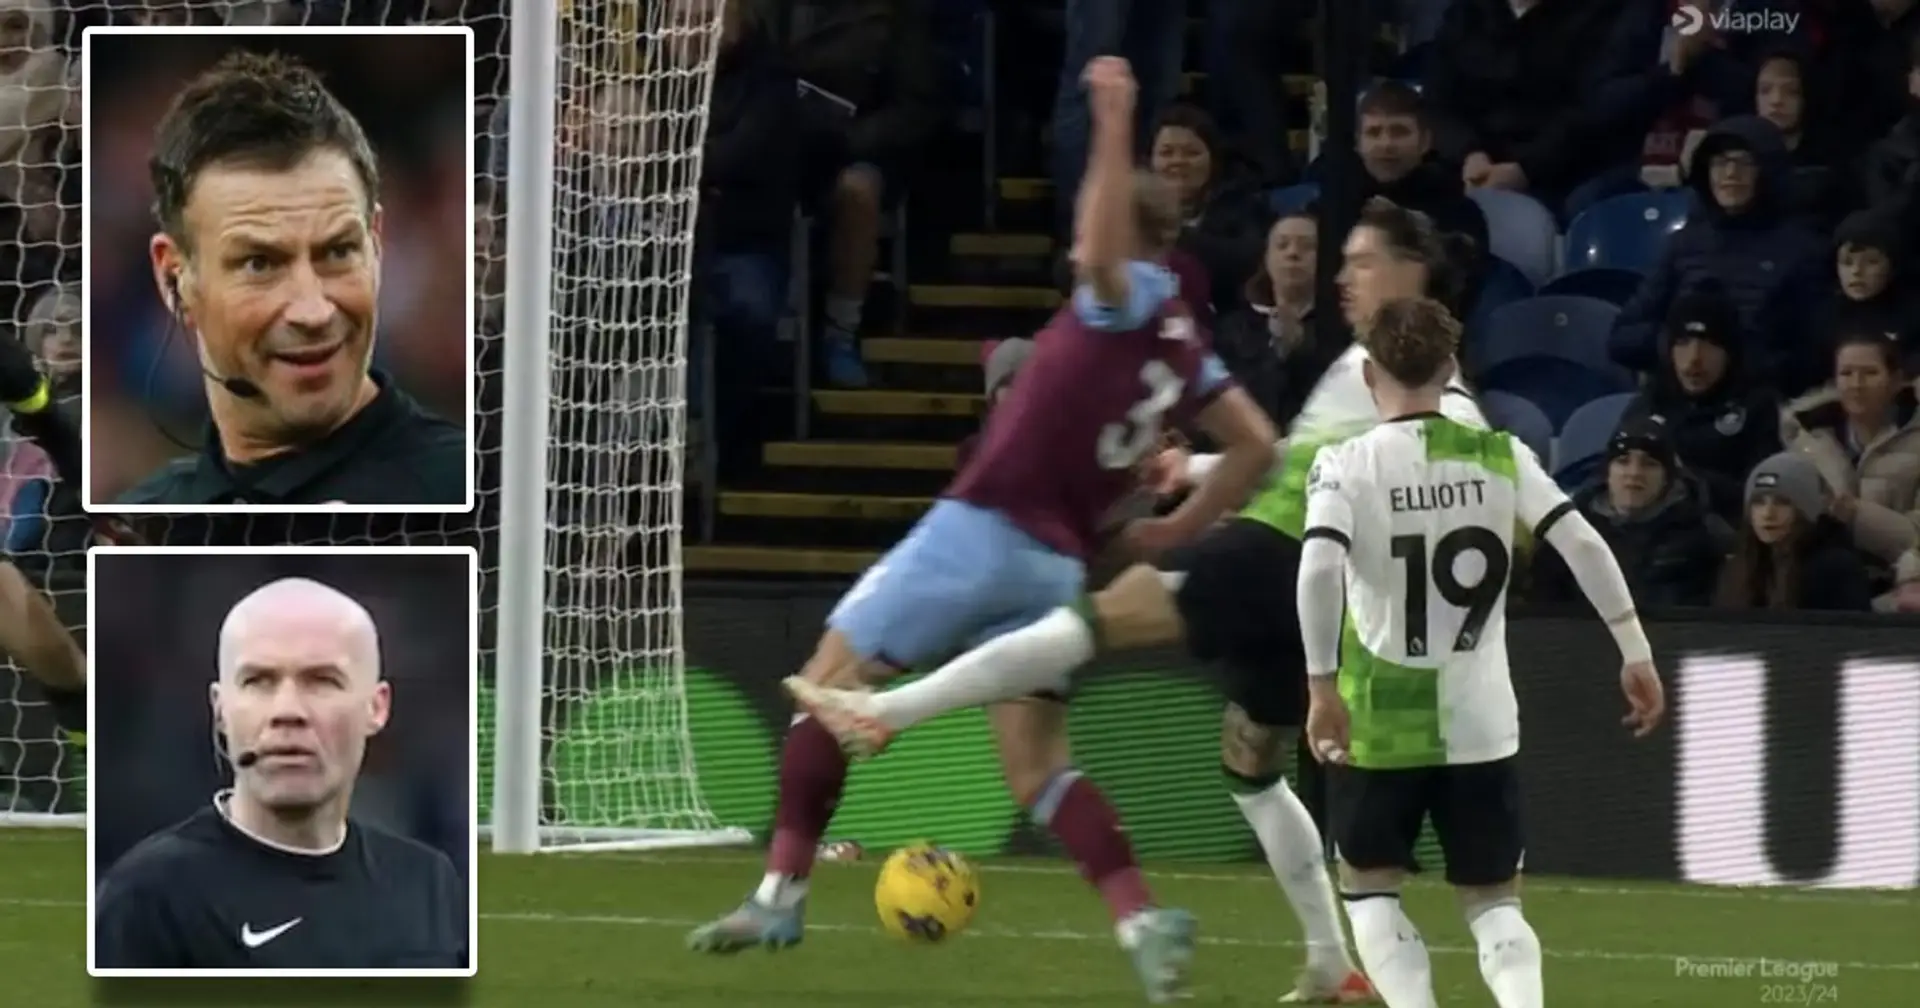 Former referee Mark Clattenburg says Paul Tierney should not have ruled out Gakpo's goal vs Burnley